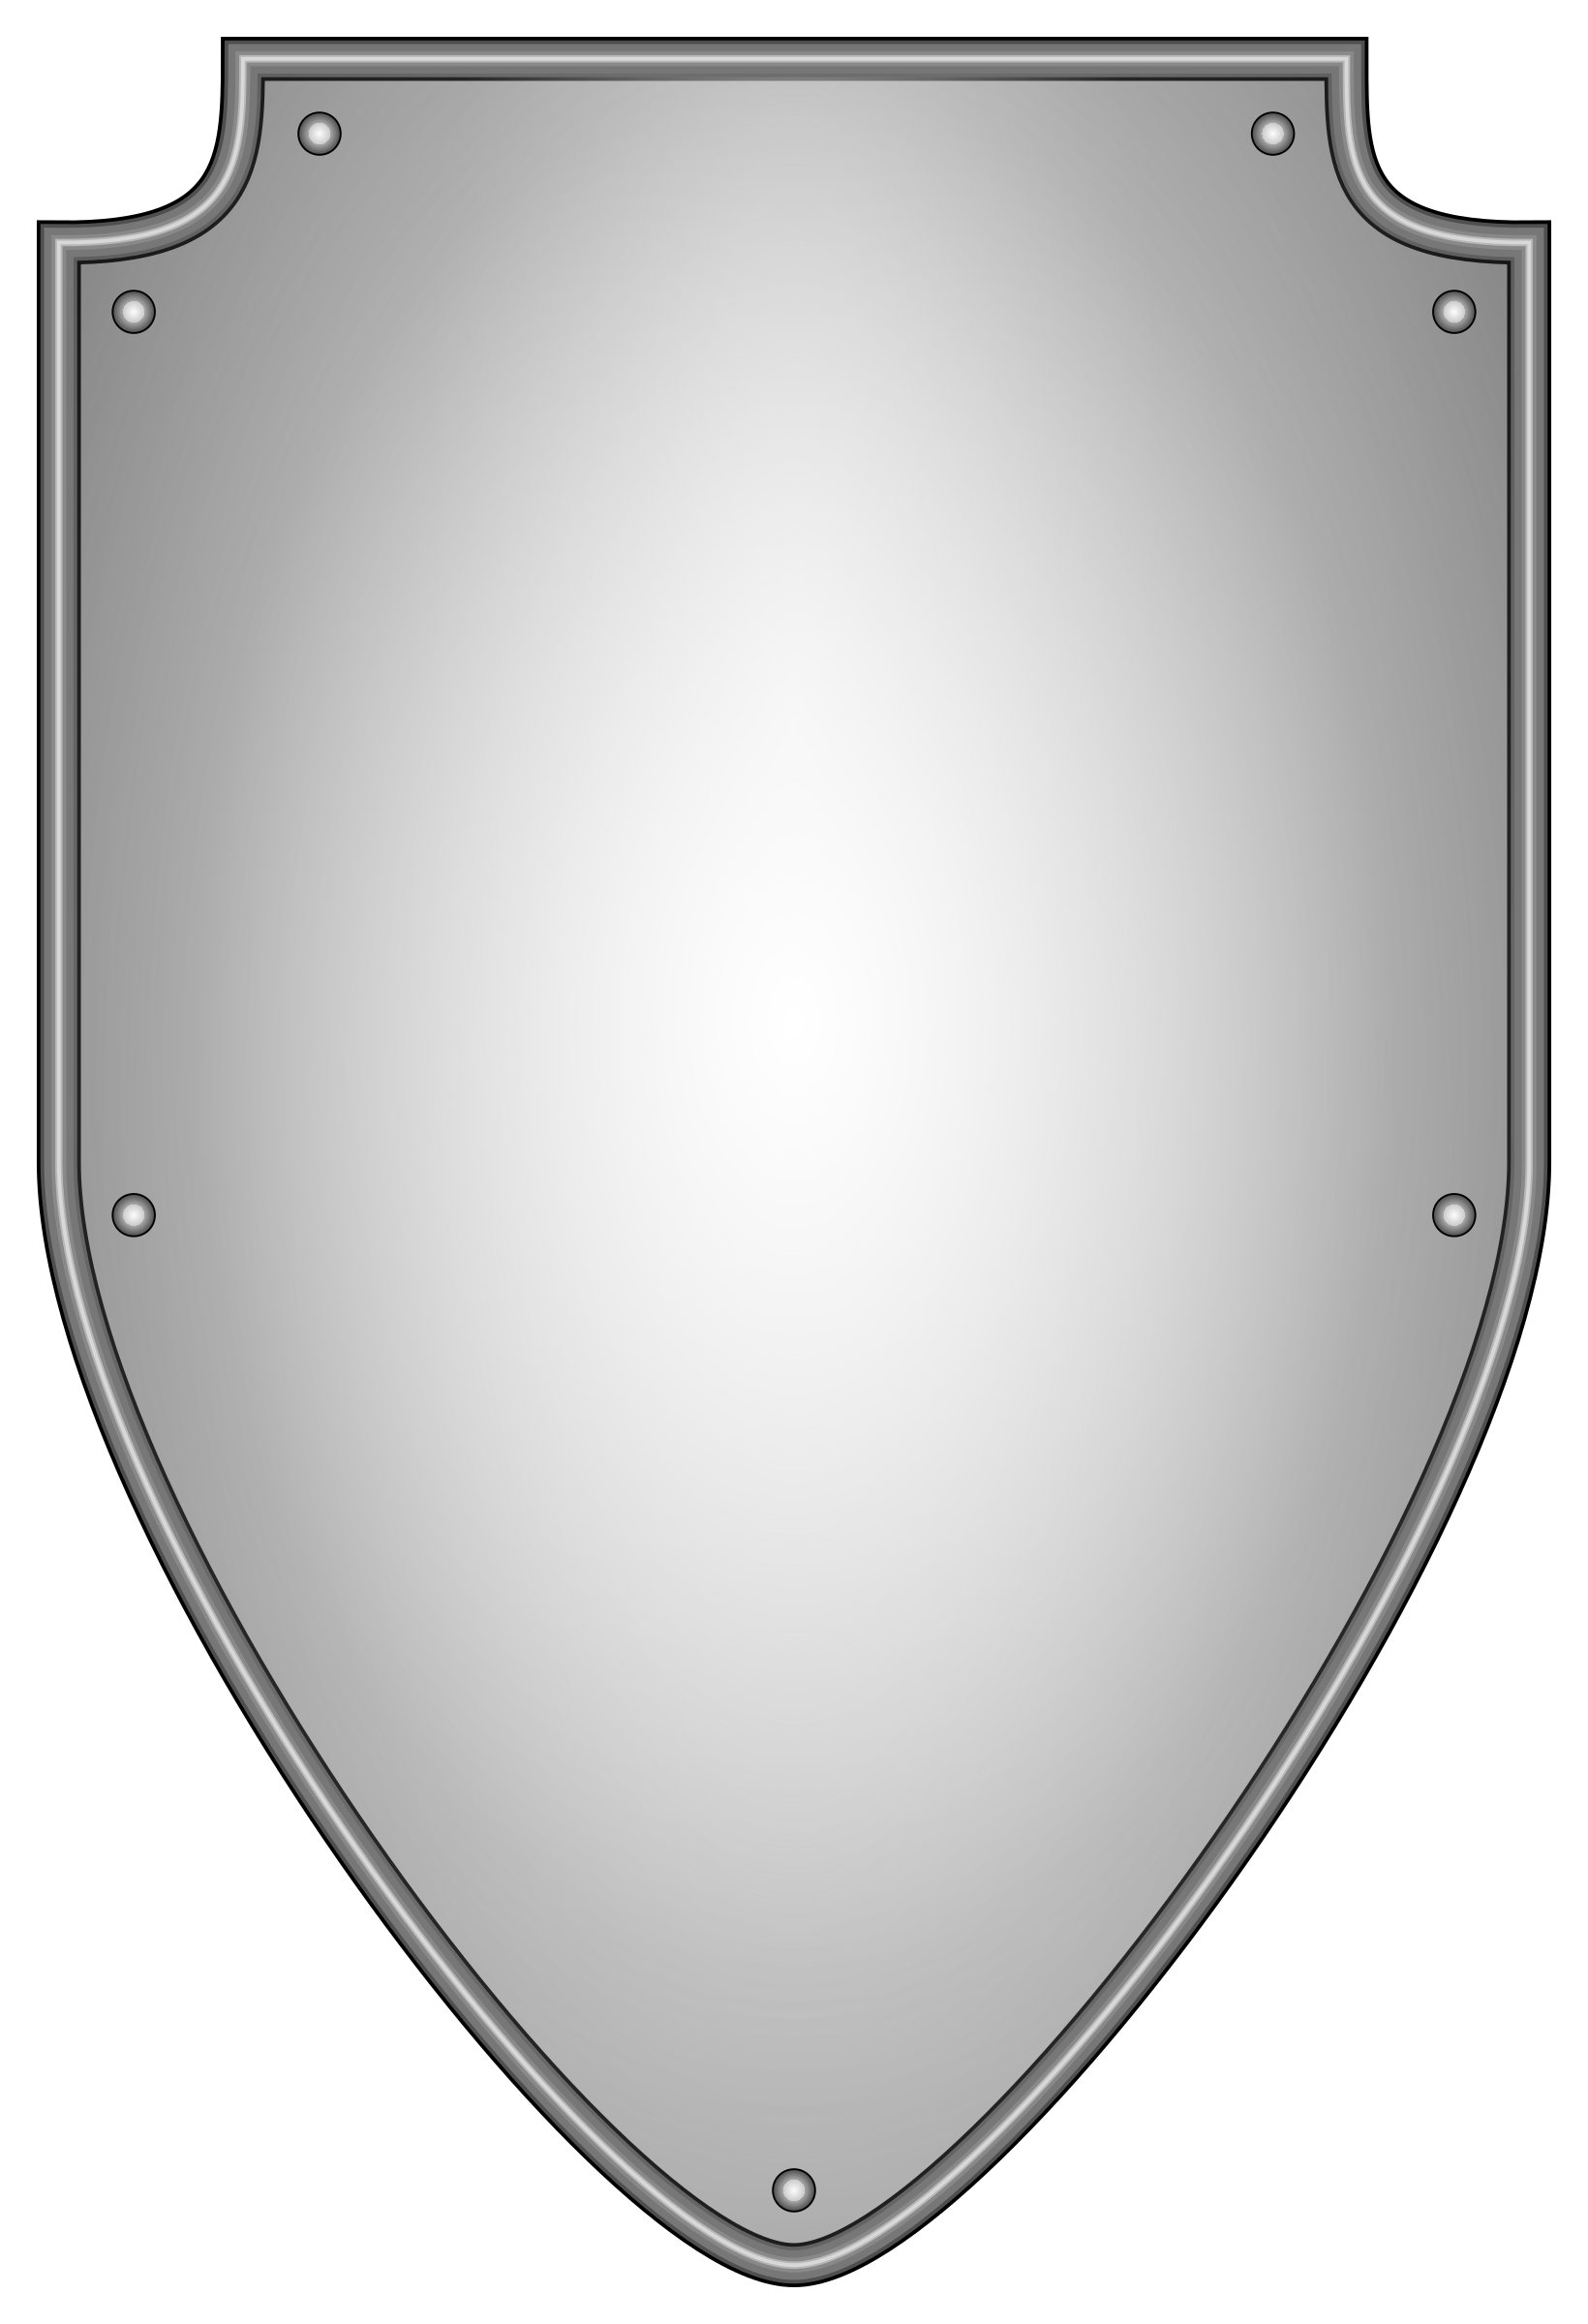 Big image png. Cool clipart shield